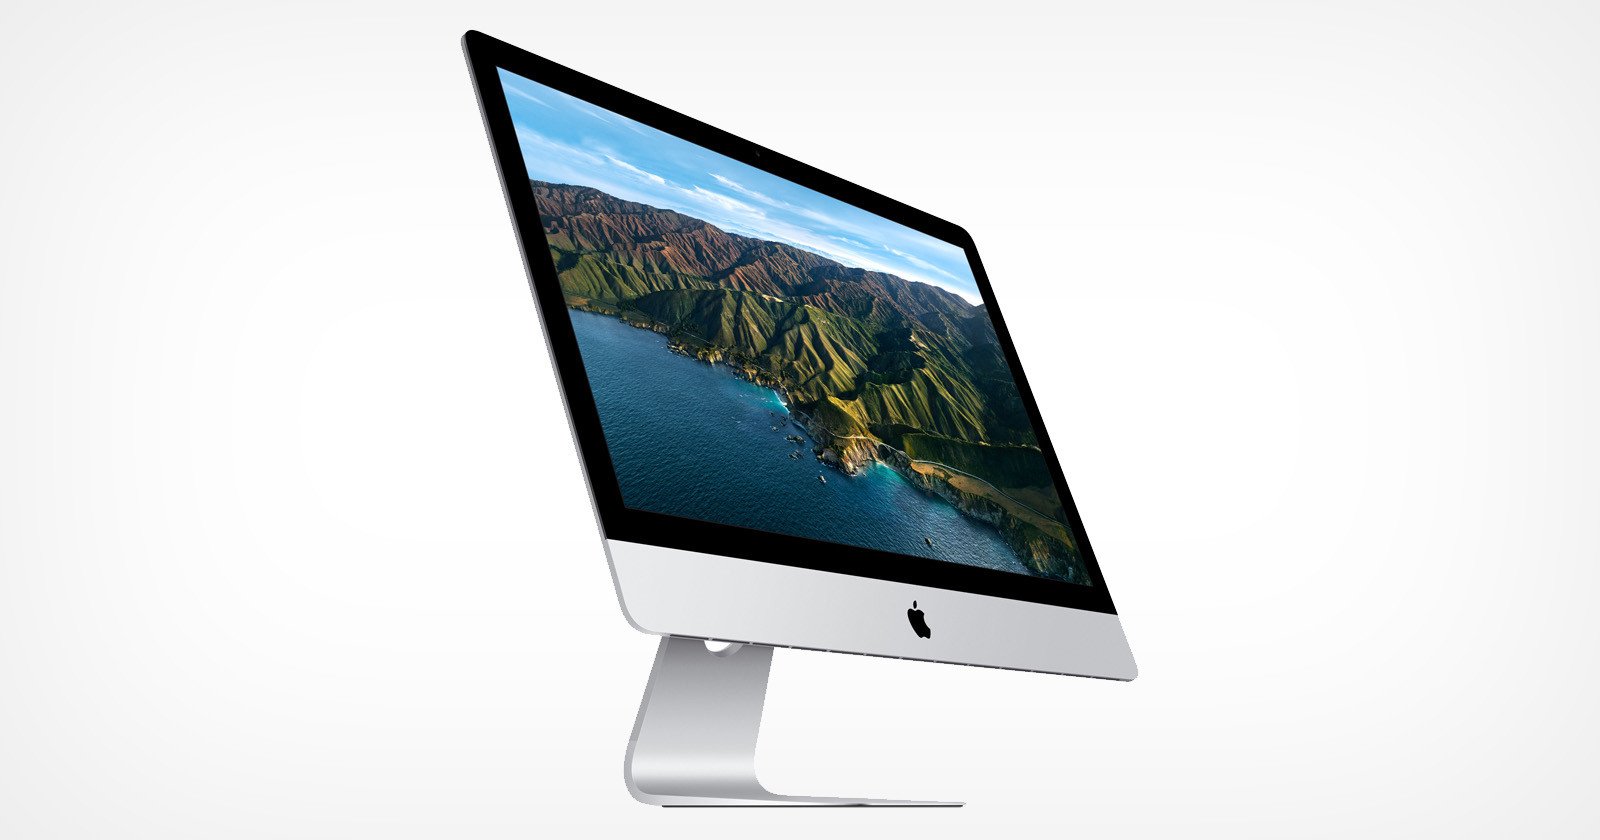  apple has discontinued 27-inch imac 